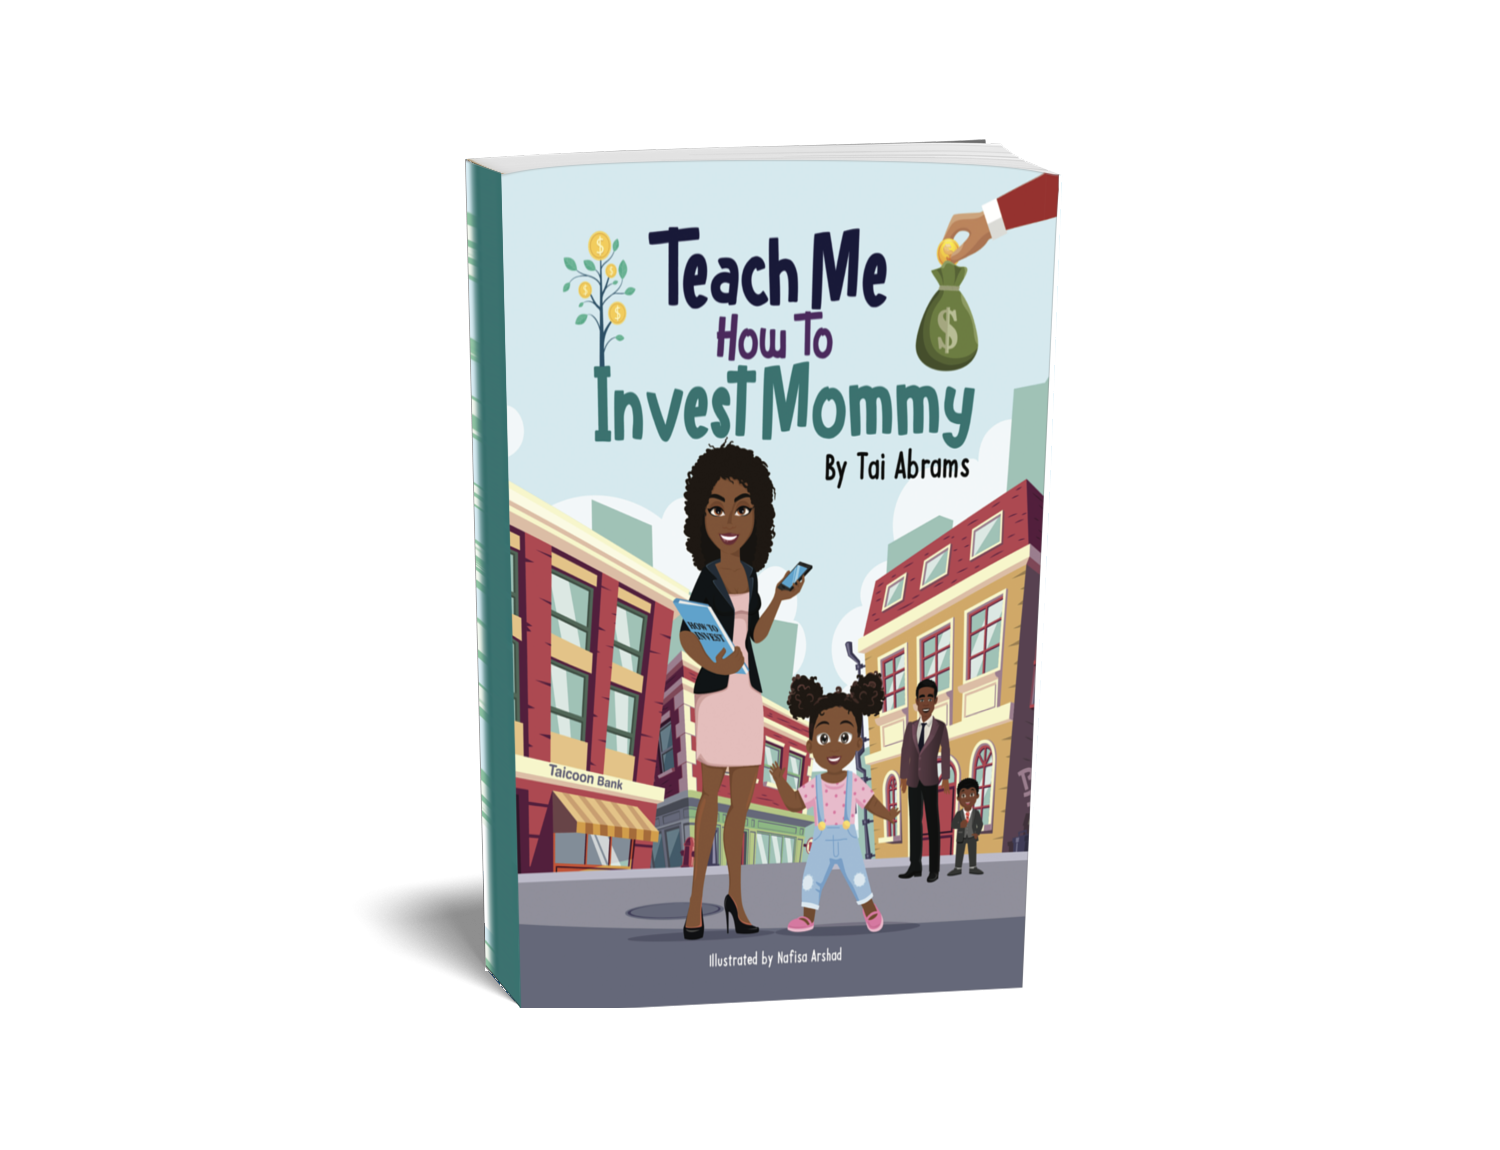 Teach Me How to Invest Mommy